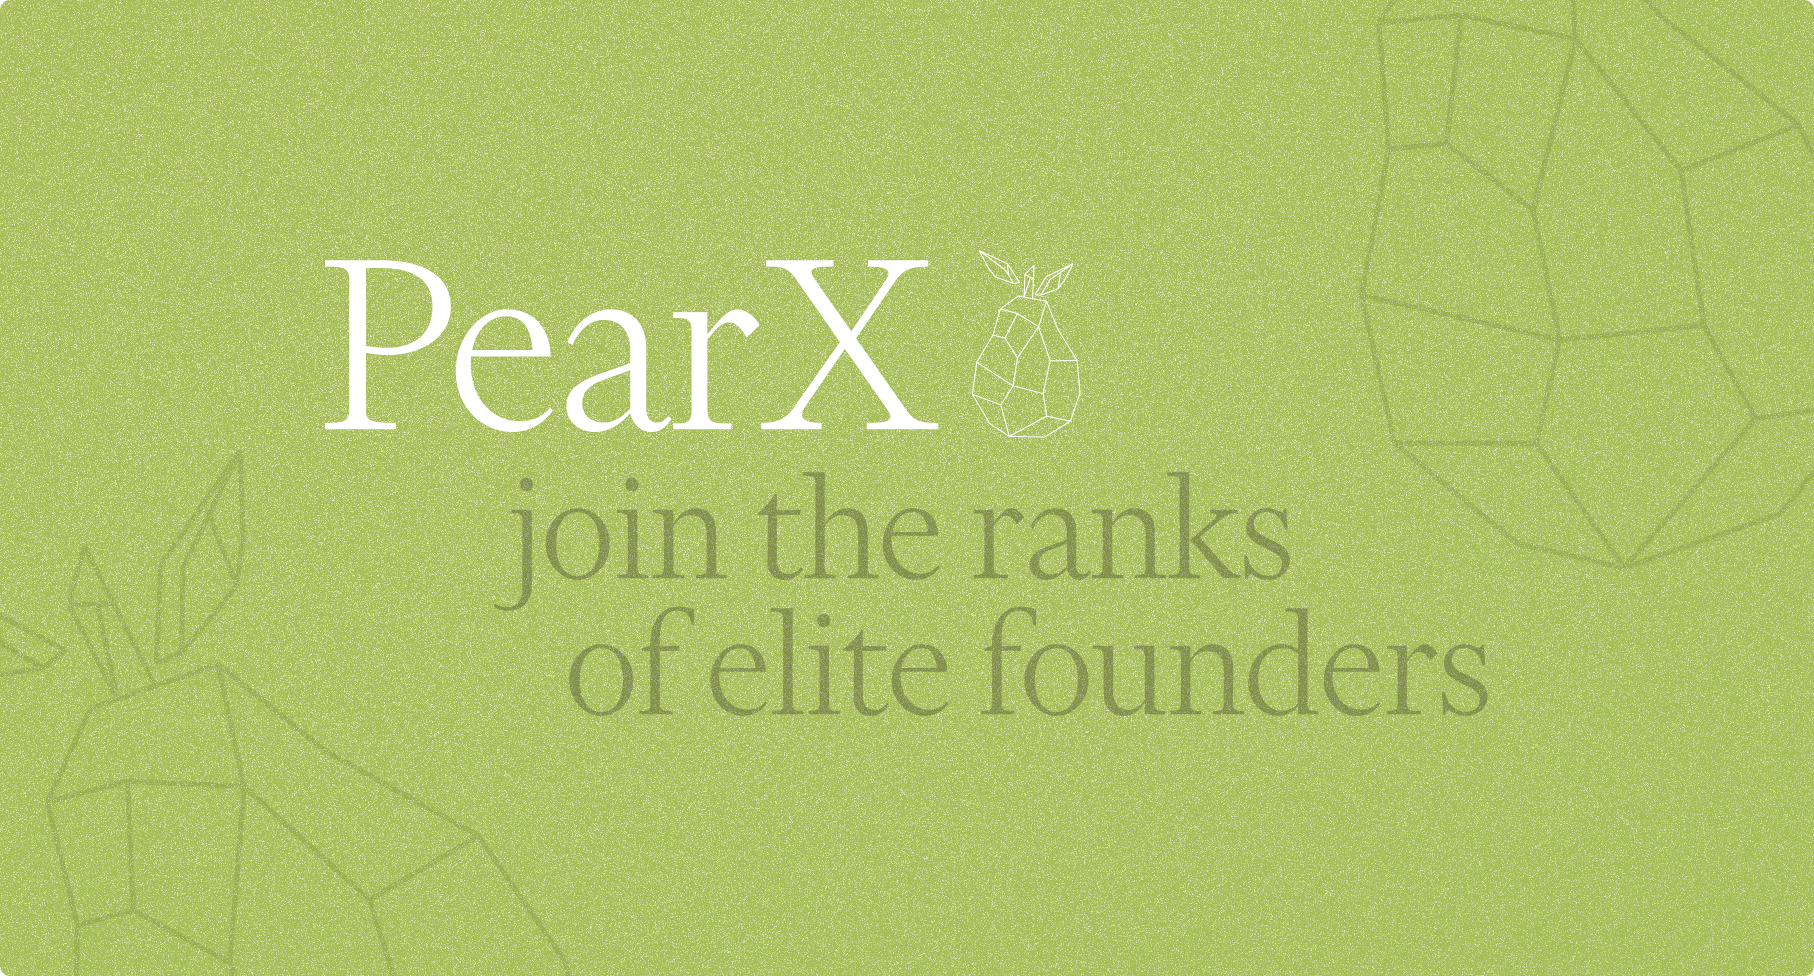 PearX: join the ranks of elite founders